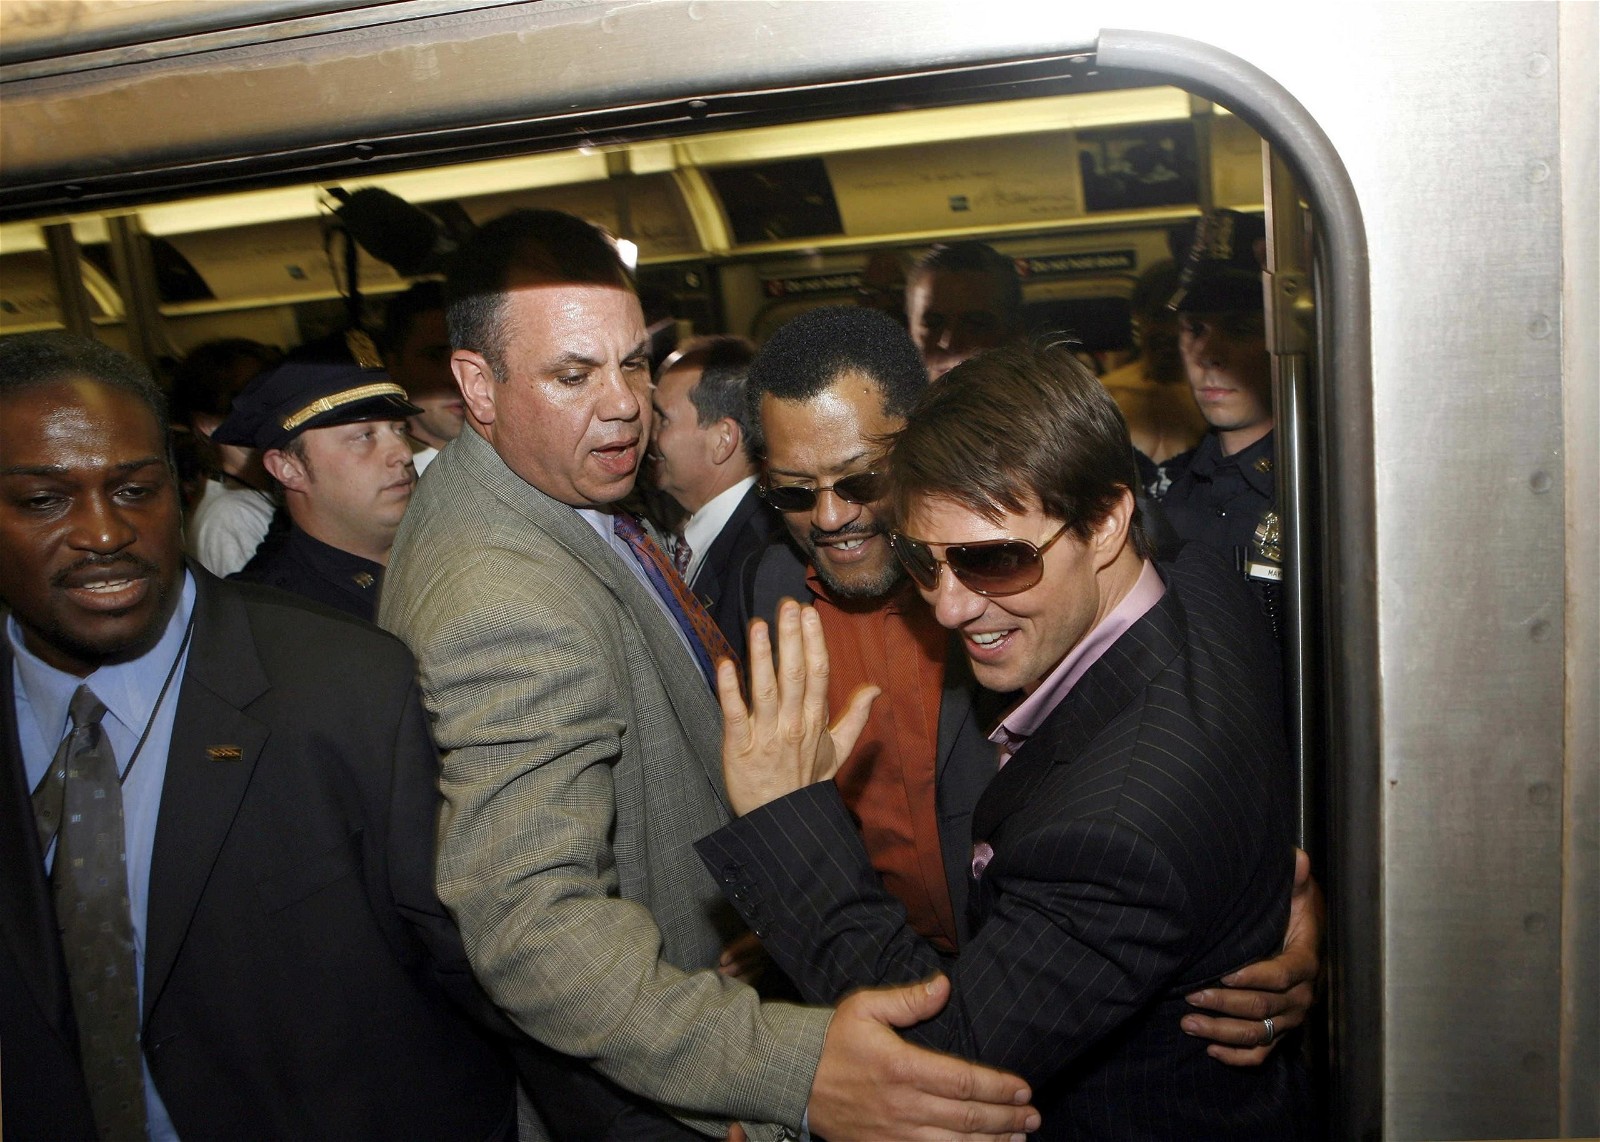 Tom Cruise and Laurence Fishburne in a Subway